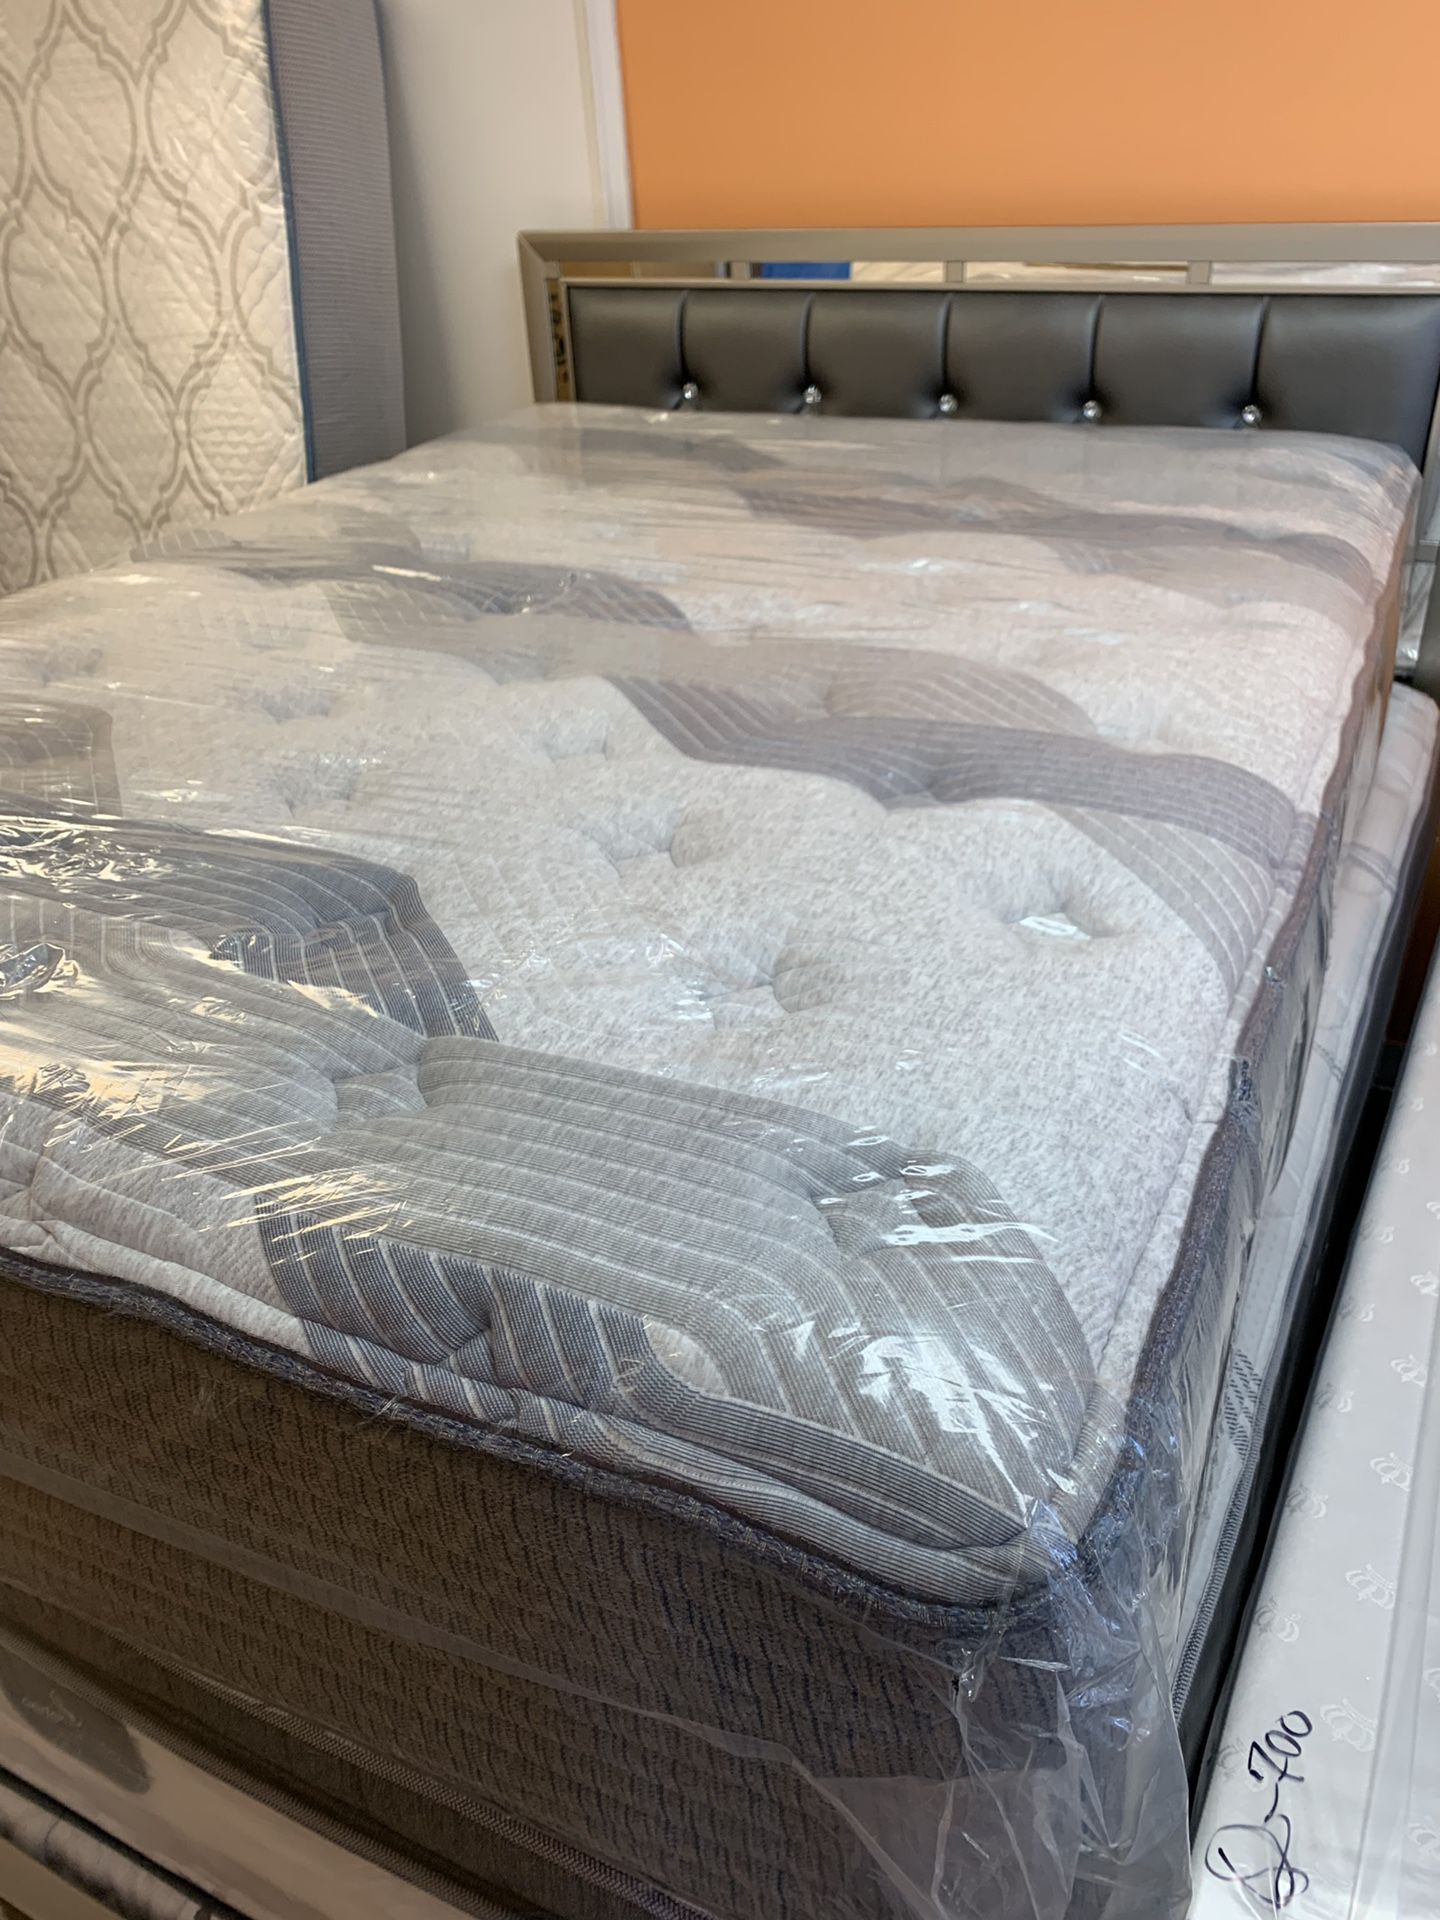 📣🎉❗️ SÚPER SALE TWIN SIZE $99 FULL SIZE $179 QUEEN SIZE STARTING $249 KING SIZE STARTING $440 ALL BRAND NEW ONLY IN DM MATTRESS FURNITURE 303 POCASSE